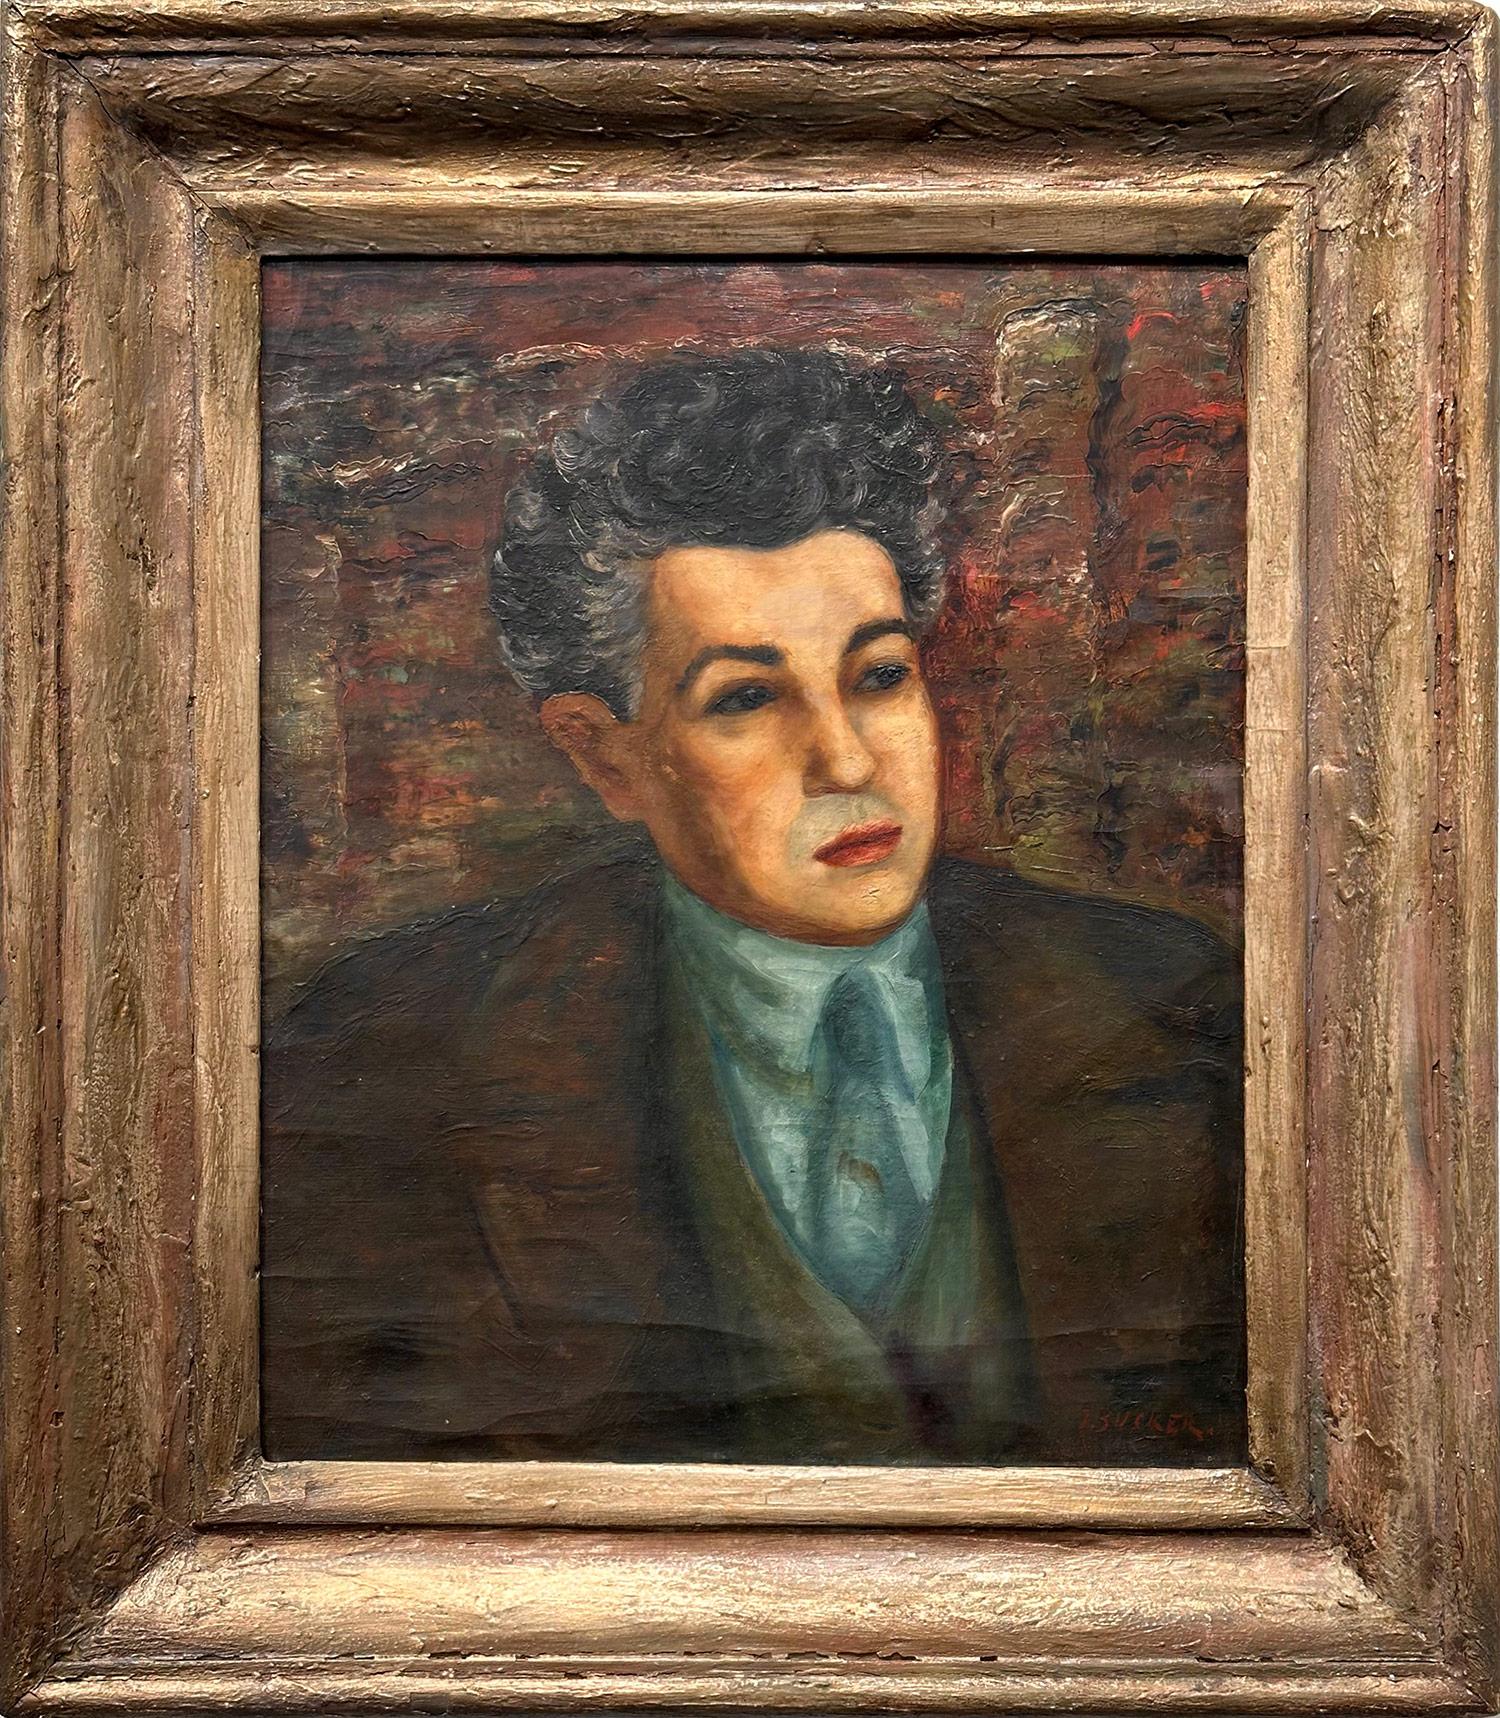 Jacques Zucker Portrait Painting - "Portrait of a Man in Suite" Post-Impressionist Oil Painting on Canvas Framed